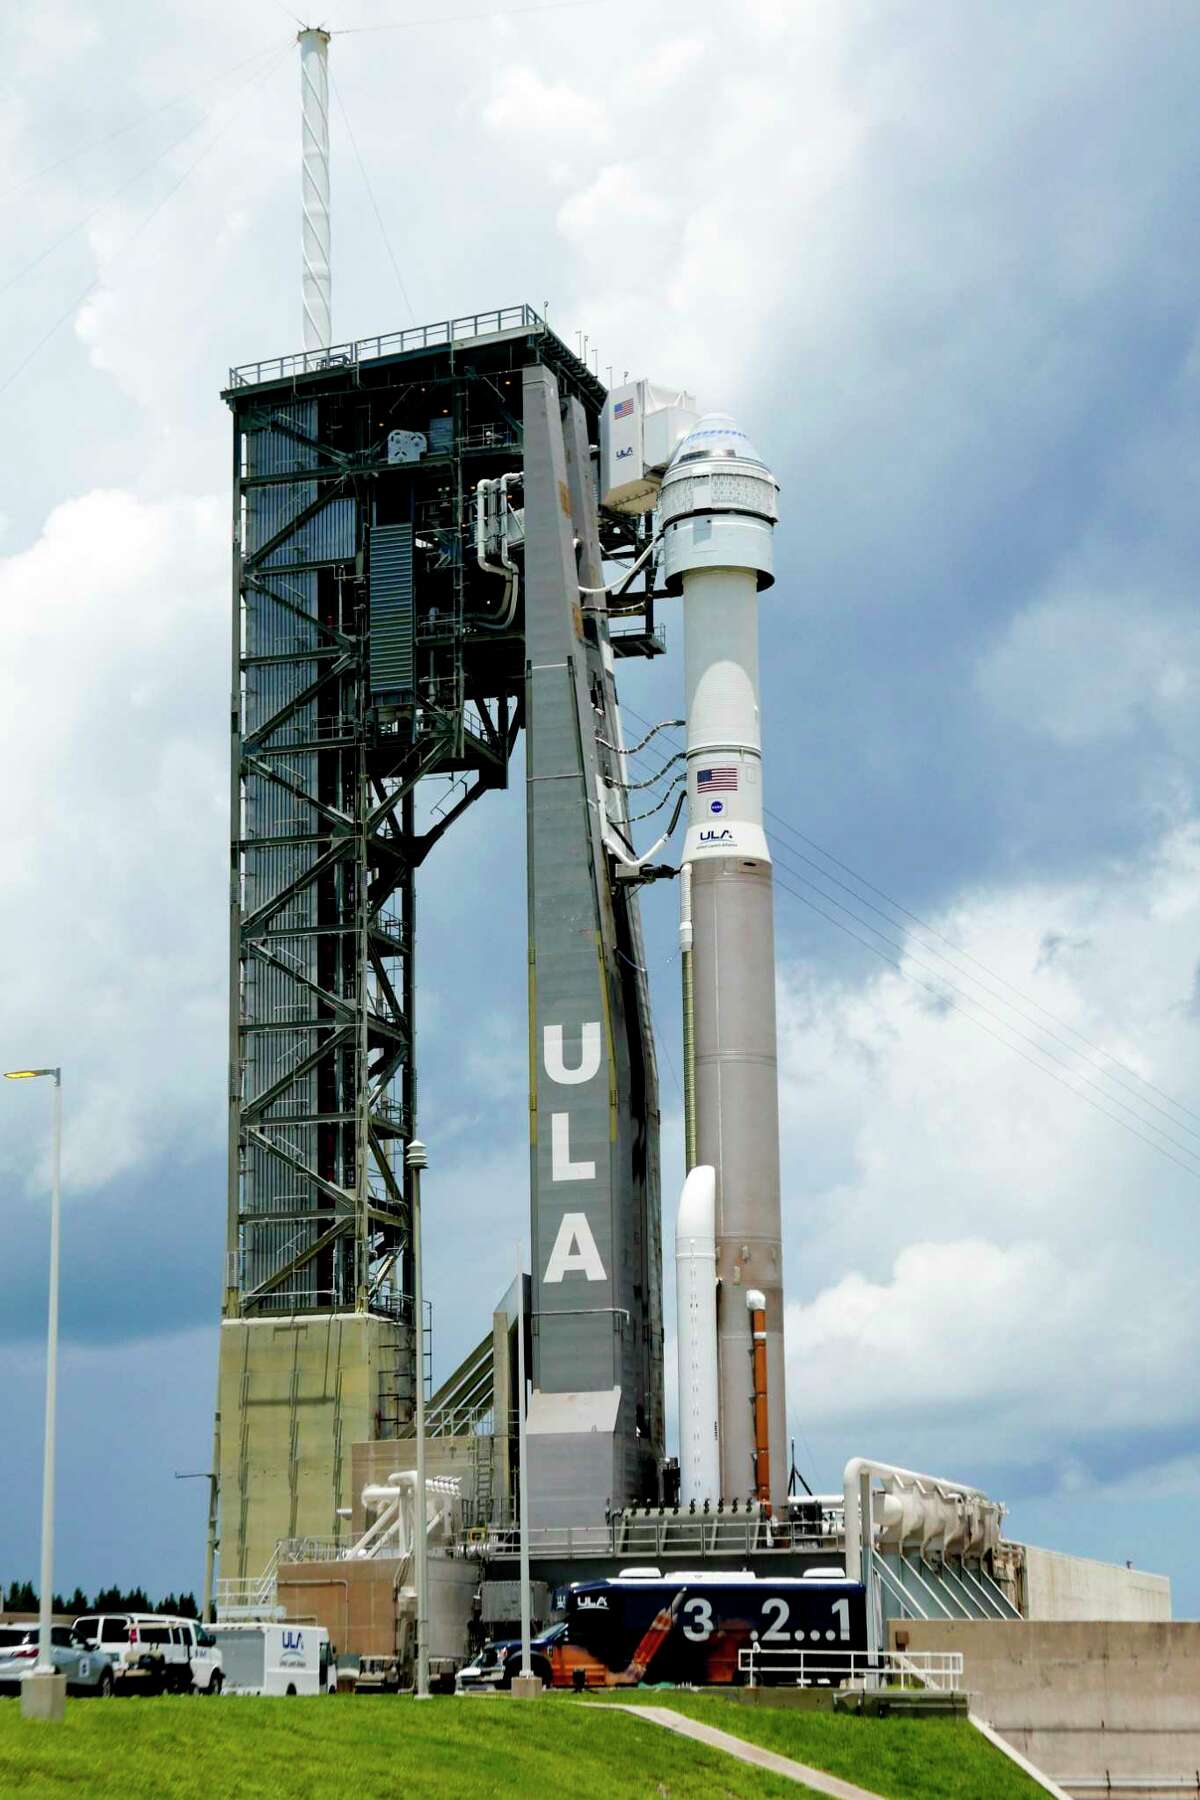 A United Launch Alliance Atlas V rocket, stands on Space Launch Complex 41 at the Cape Canaveral Space Force Station with Boeing's CST-100 Starliner spacecraft ready for another attempt at an unpiloted test flight to the International Space Station,, Monday, Aug. 2, 2021, in Cape Canaveral, Fla. The new launch date is scheduled for Tuesday.